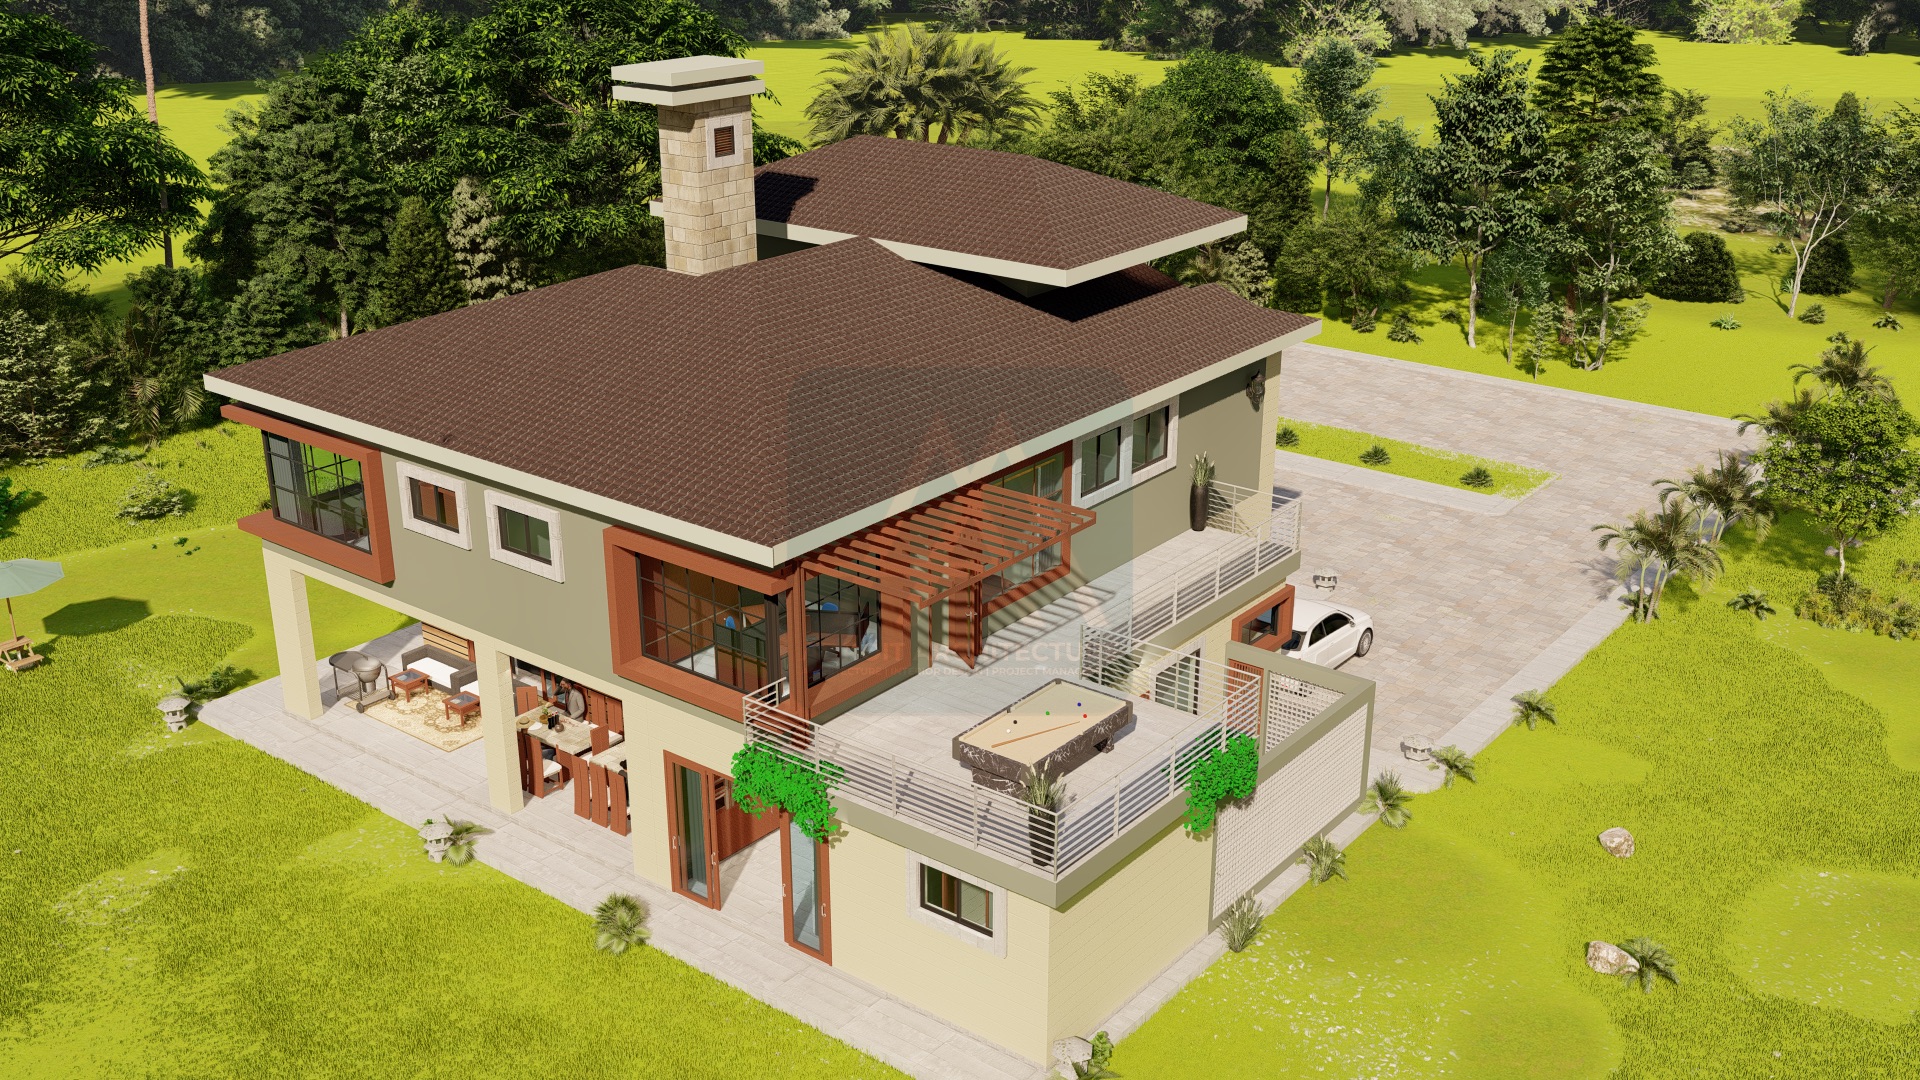 The Thamani 5 Bedroom House Plan